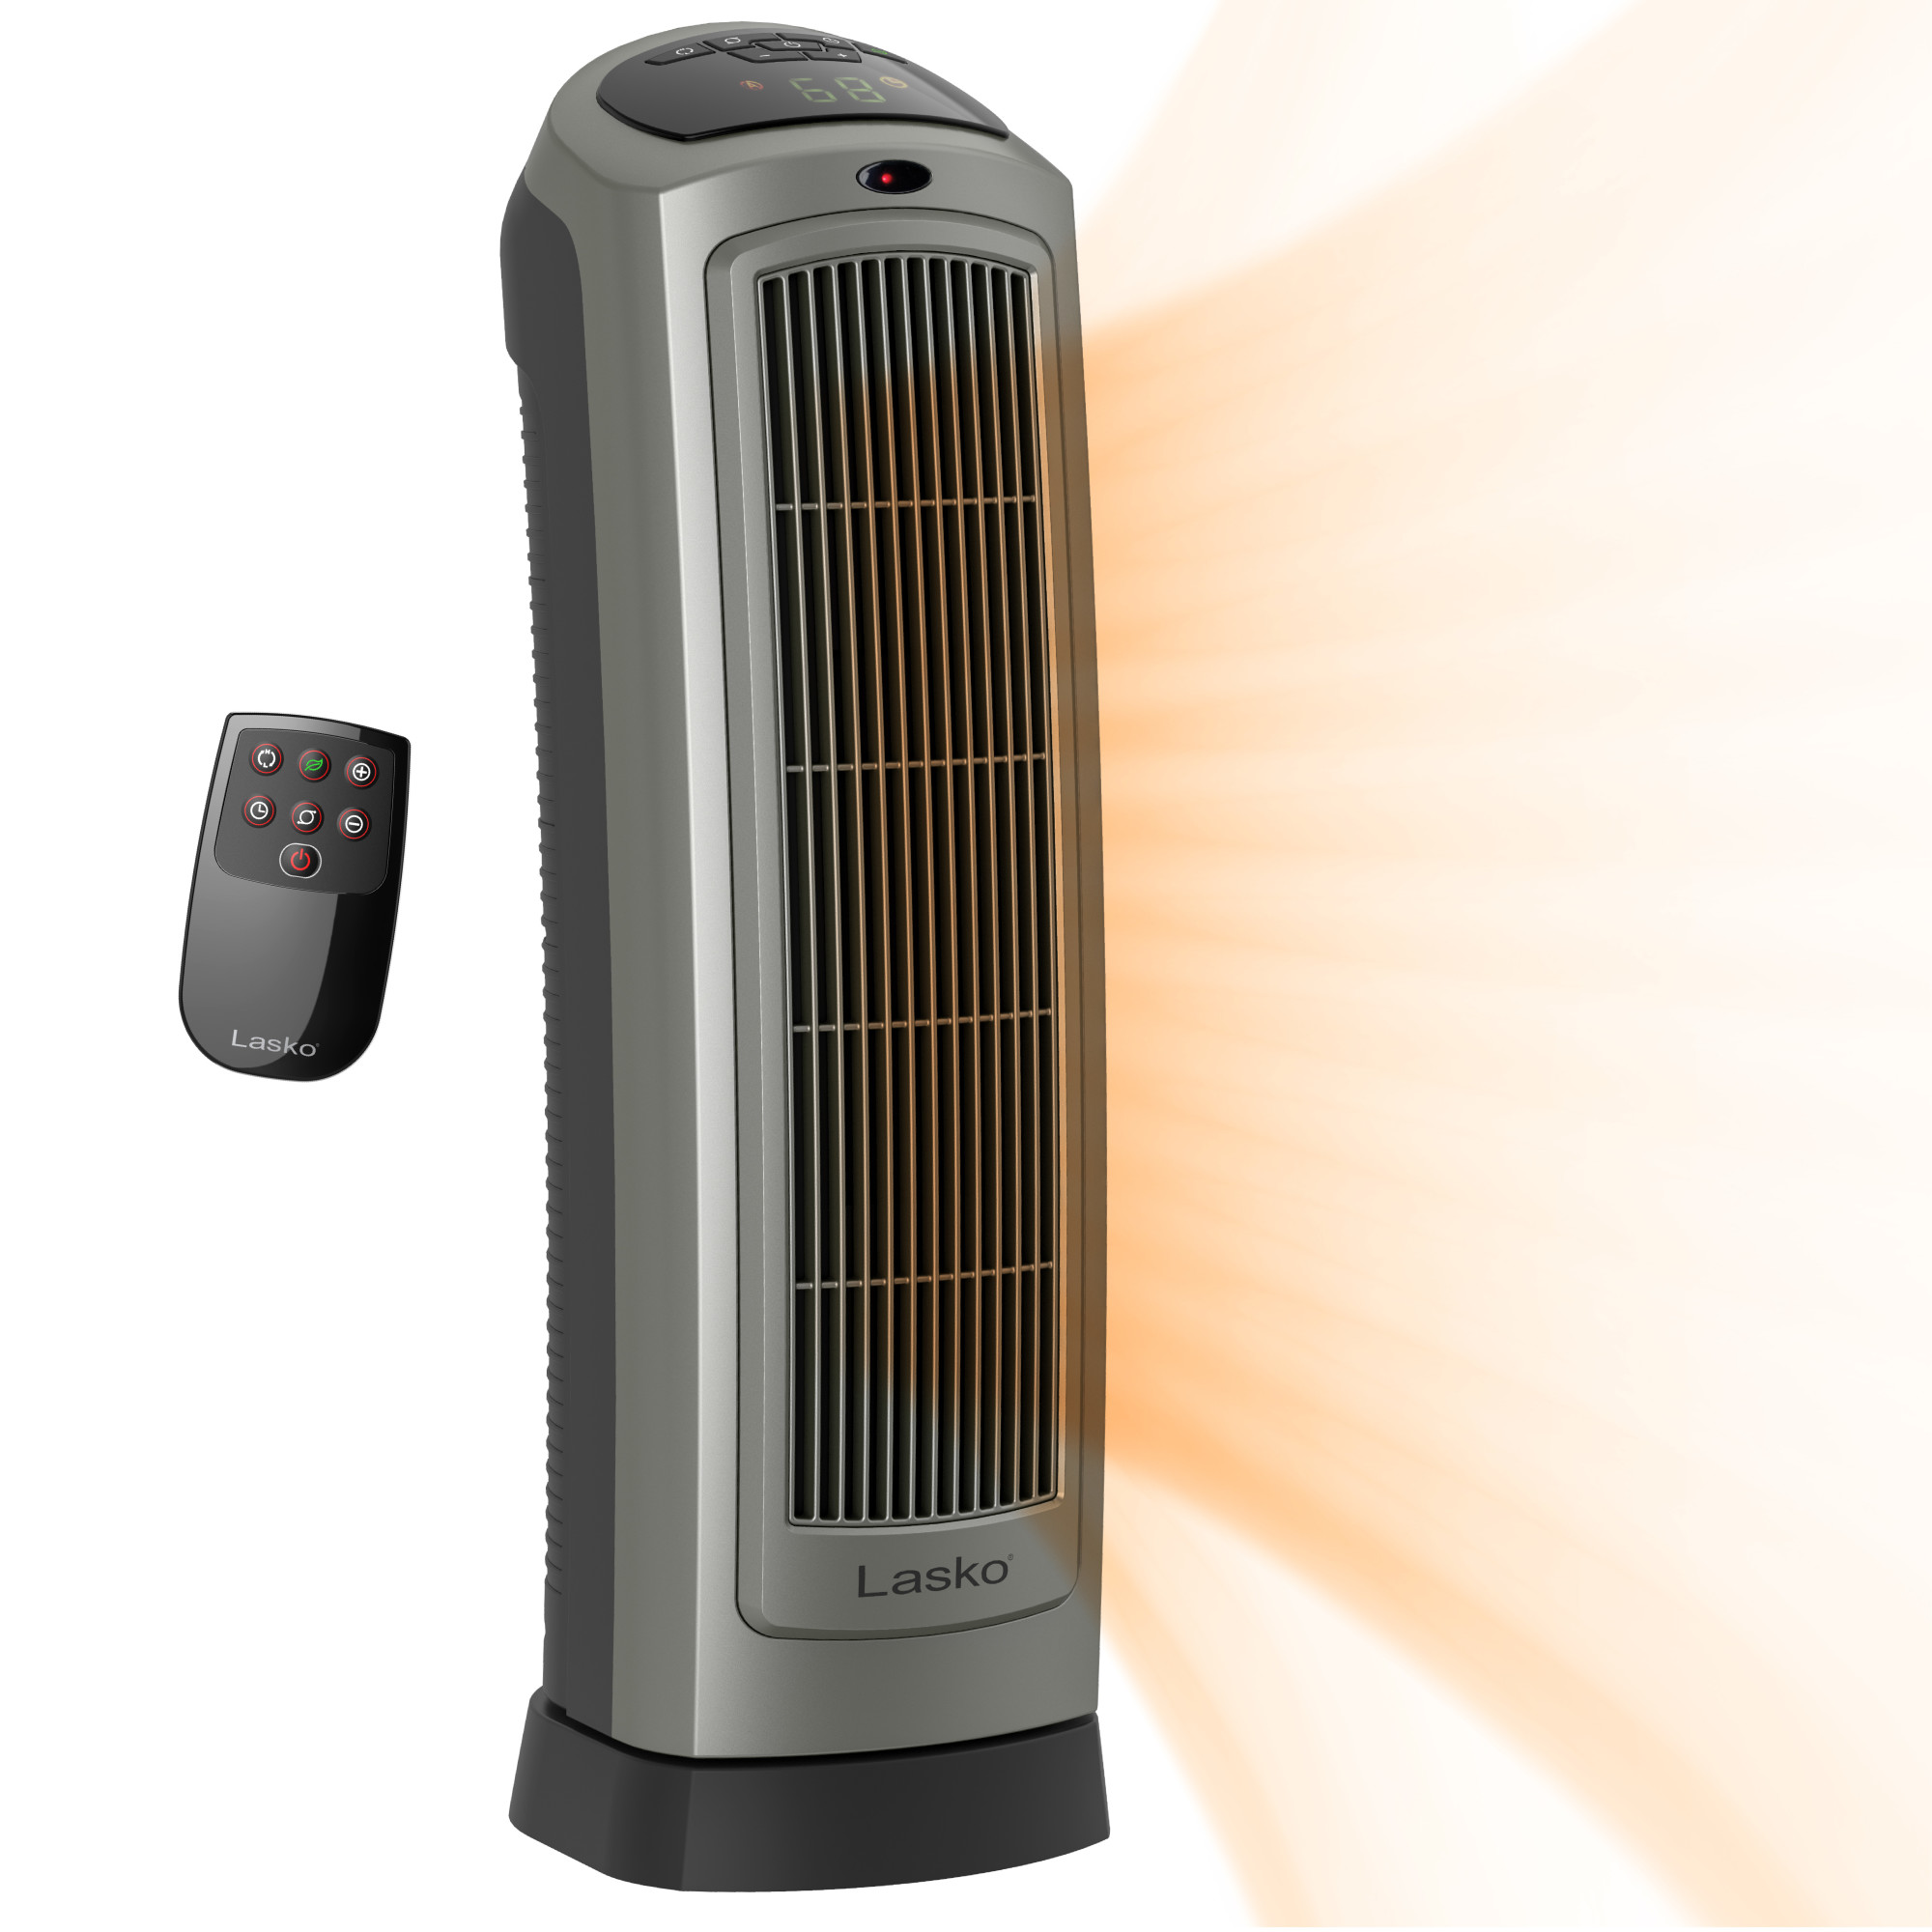 Lasko 22.2" 1500W Oscillating Ceramic Electric Tower Space Heater with Remote, Gray, 5538, New - image 1 of 13